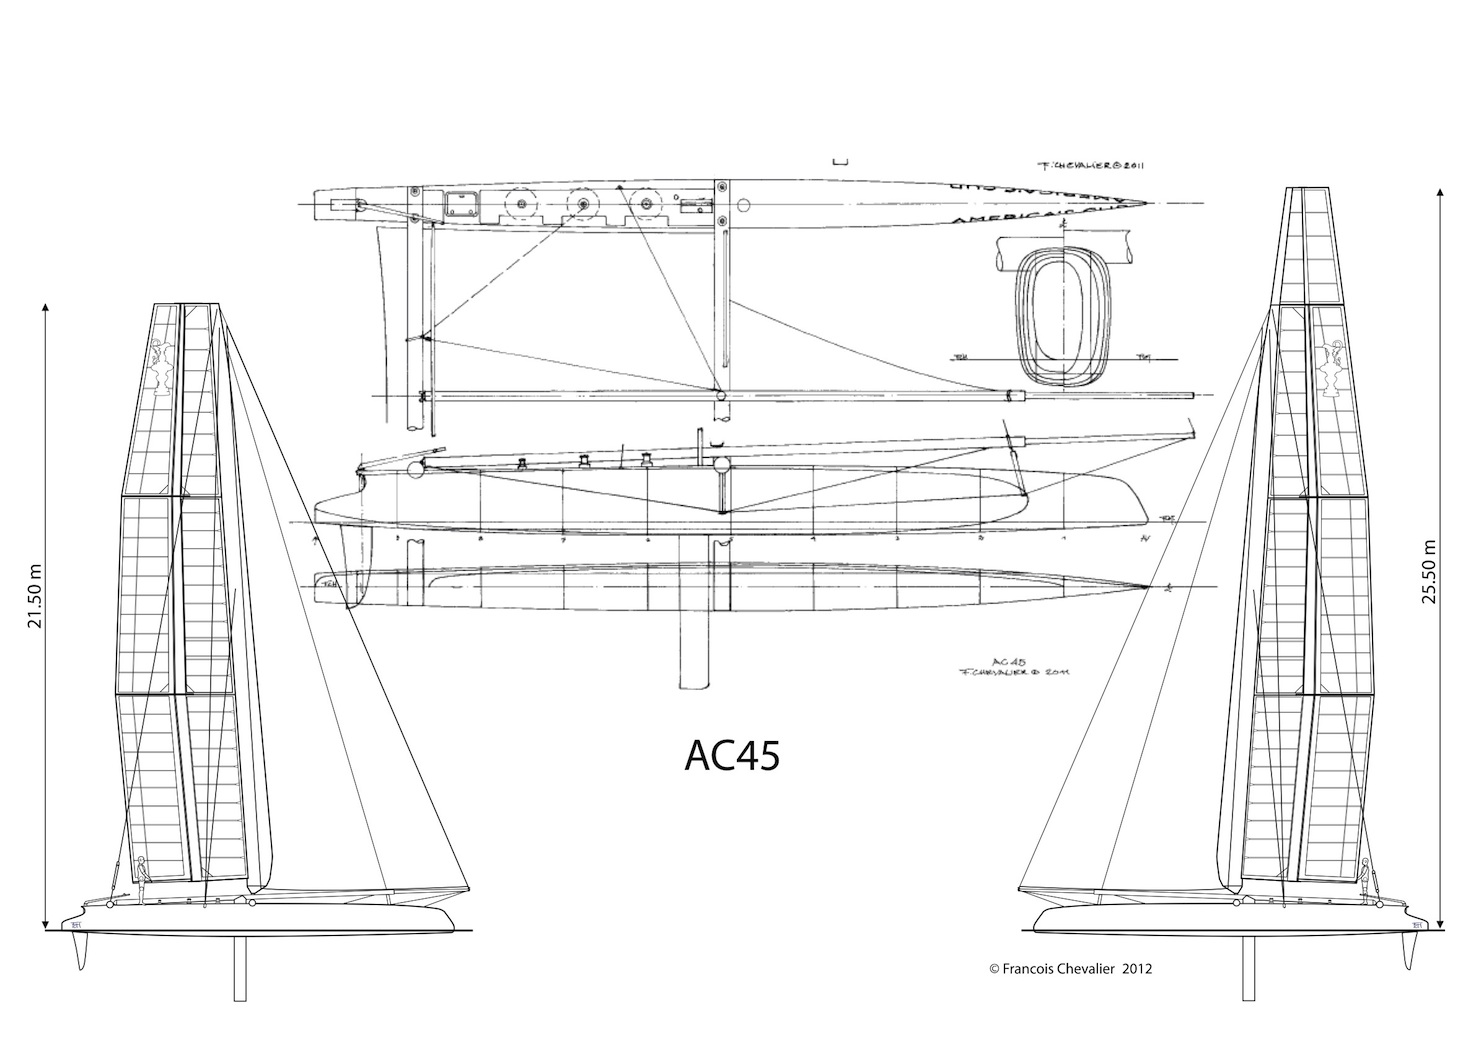 Chevalier Taglang: AMERICA'S CUP - AC45 PLANS - AC45 LINES AND SAIL 